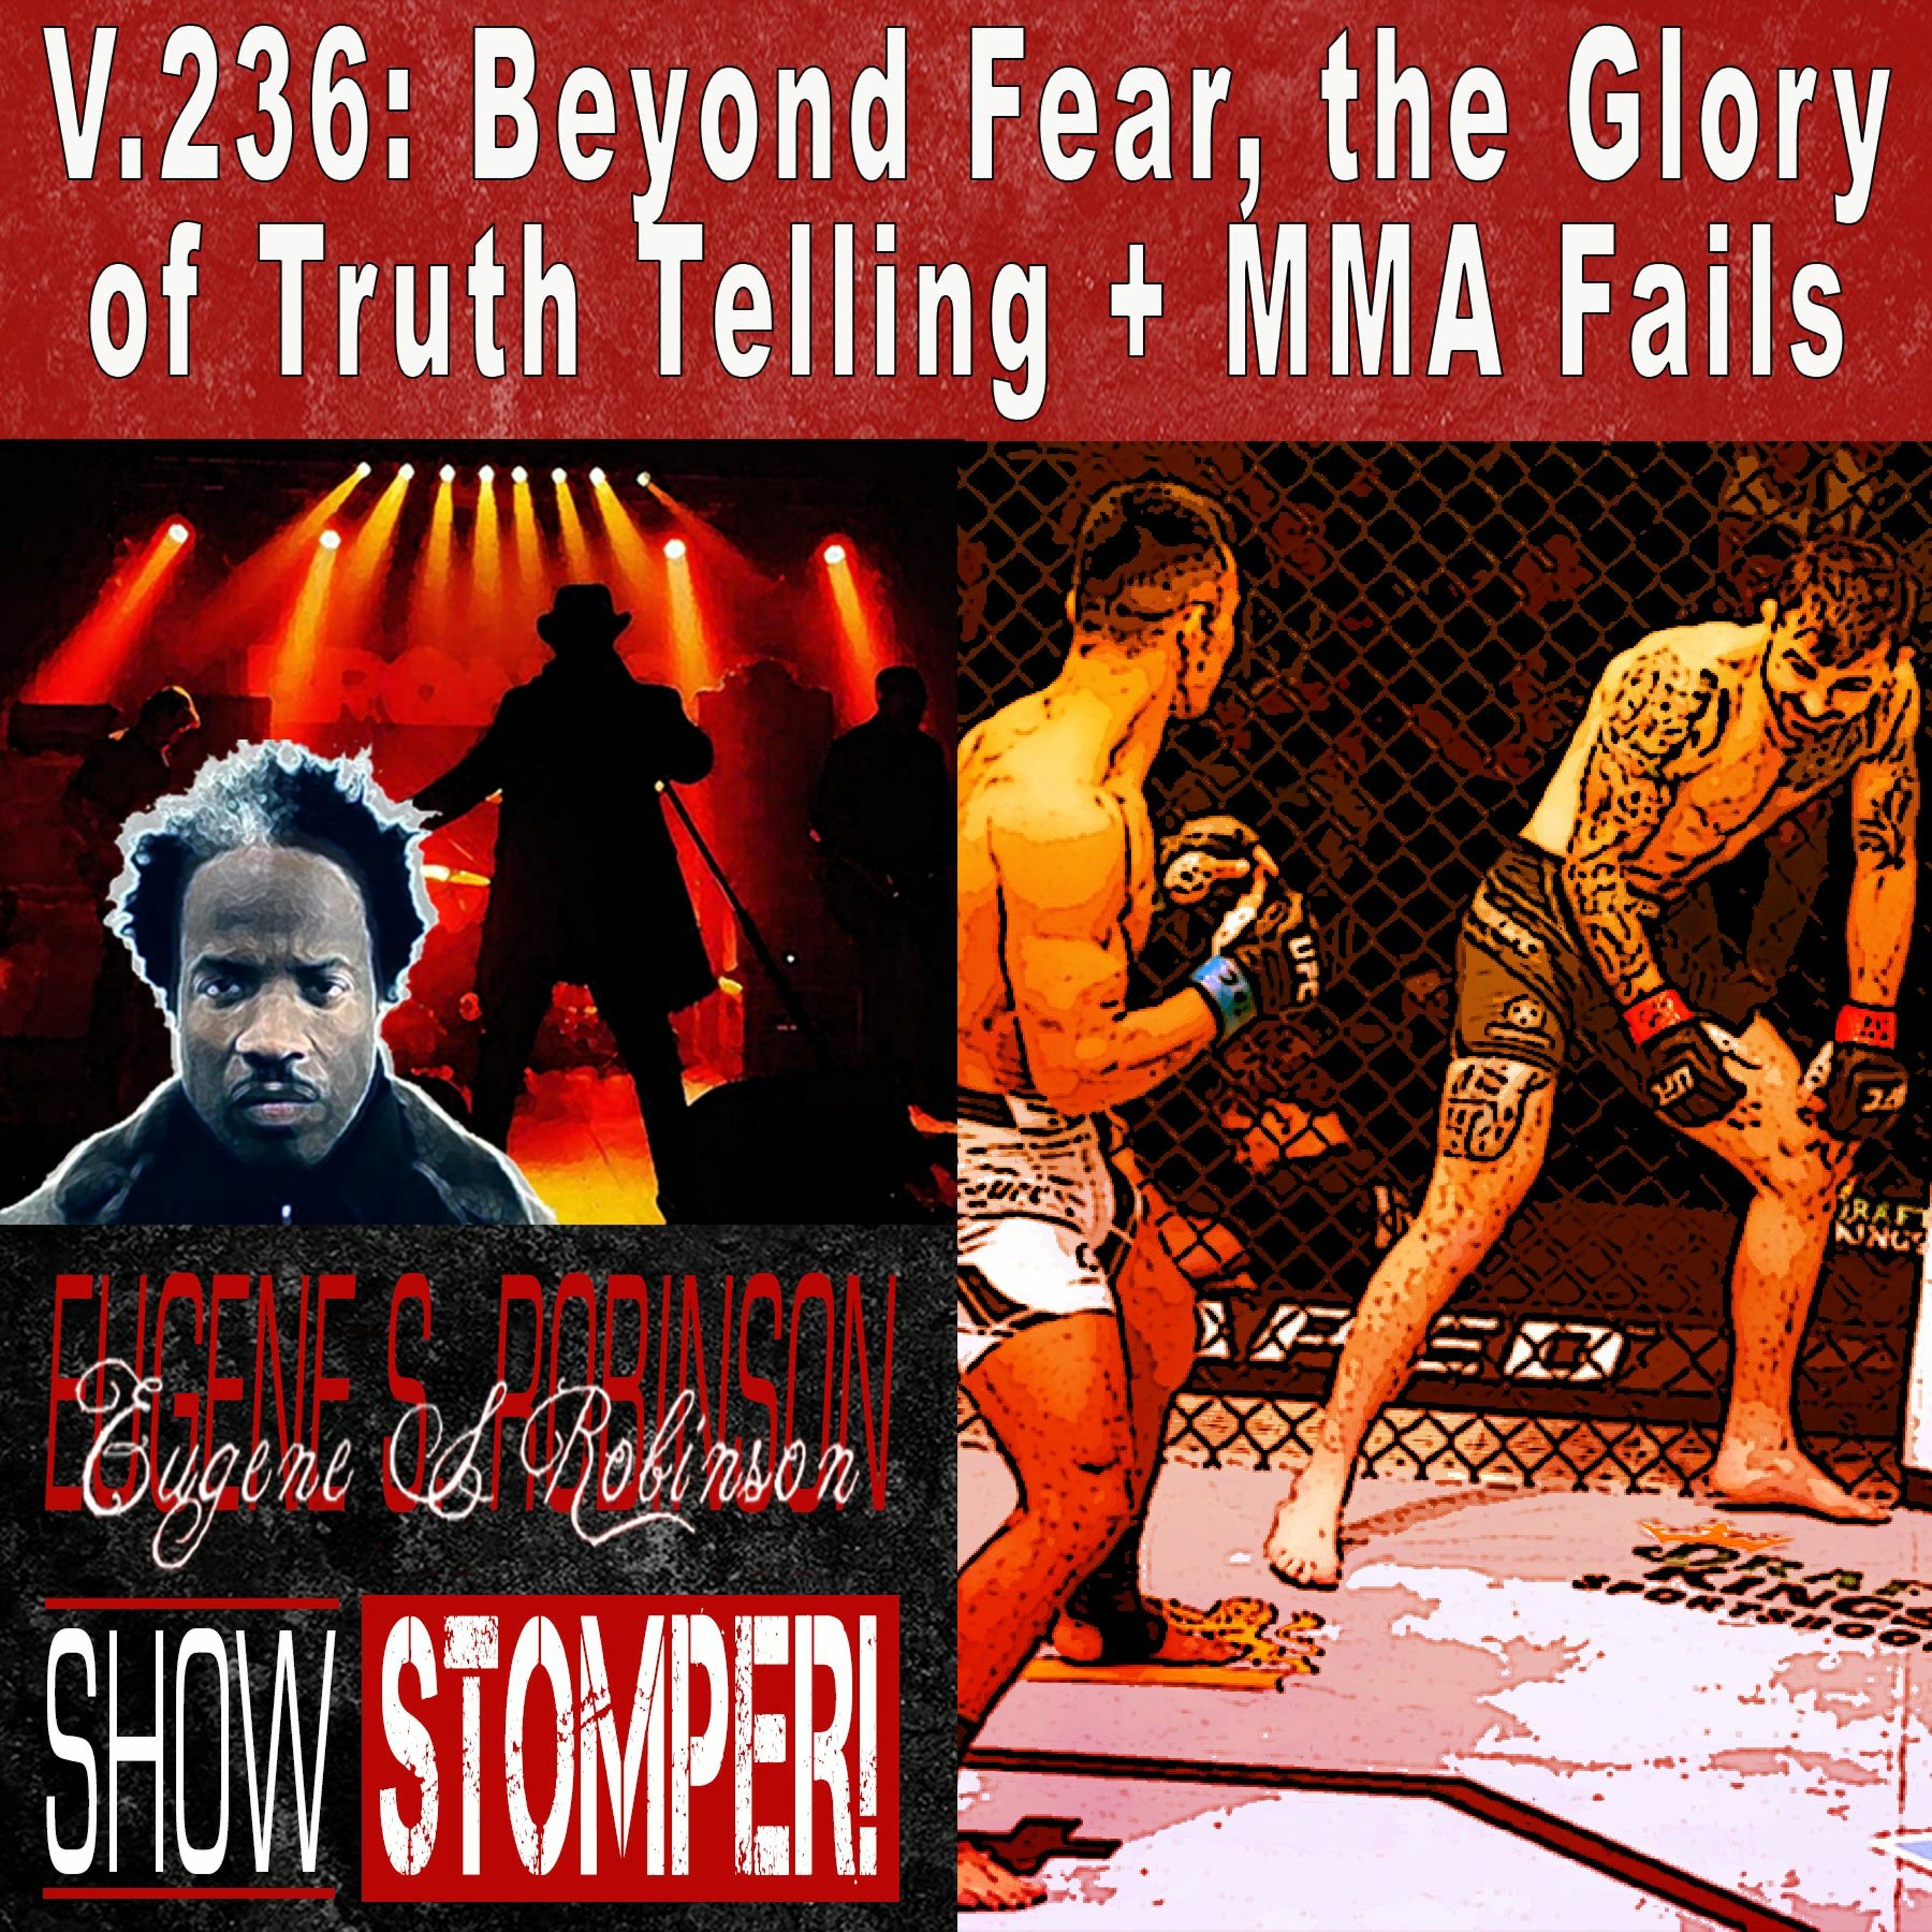 V.236: Beyond Fear, the Glory of Truth Telling + MMA Fails On The Eugene S. Robinson Show Stomper!